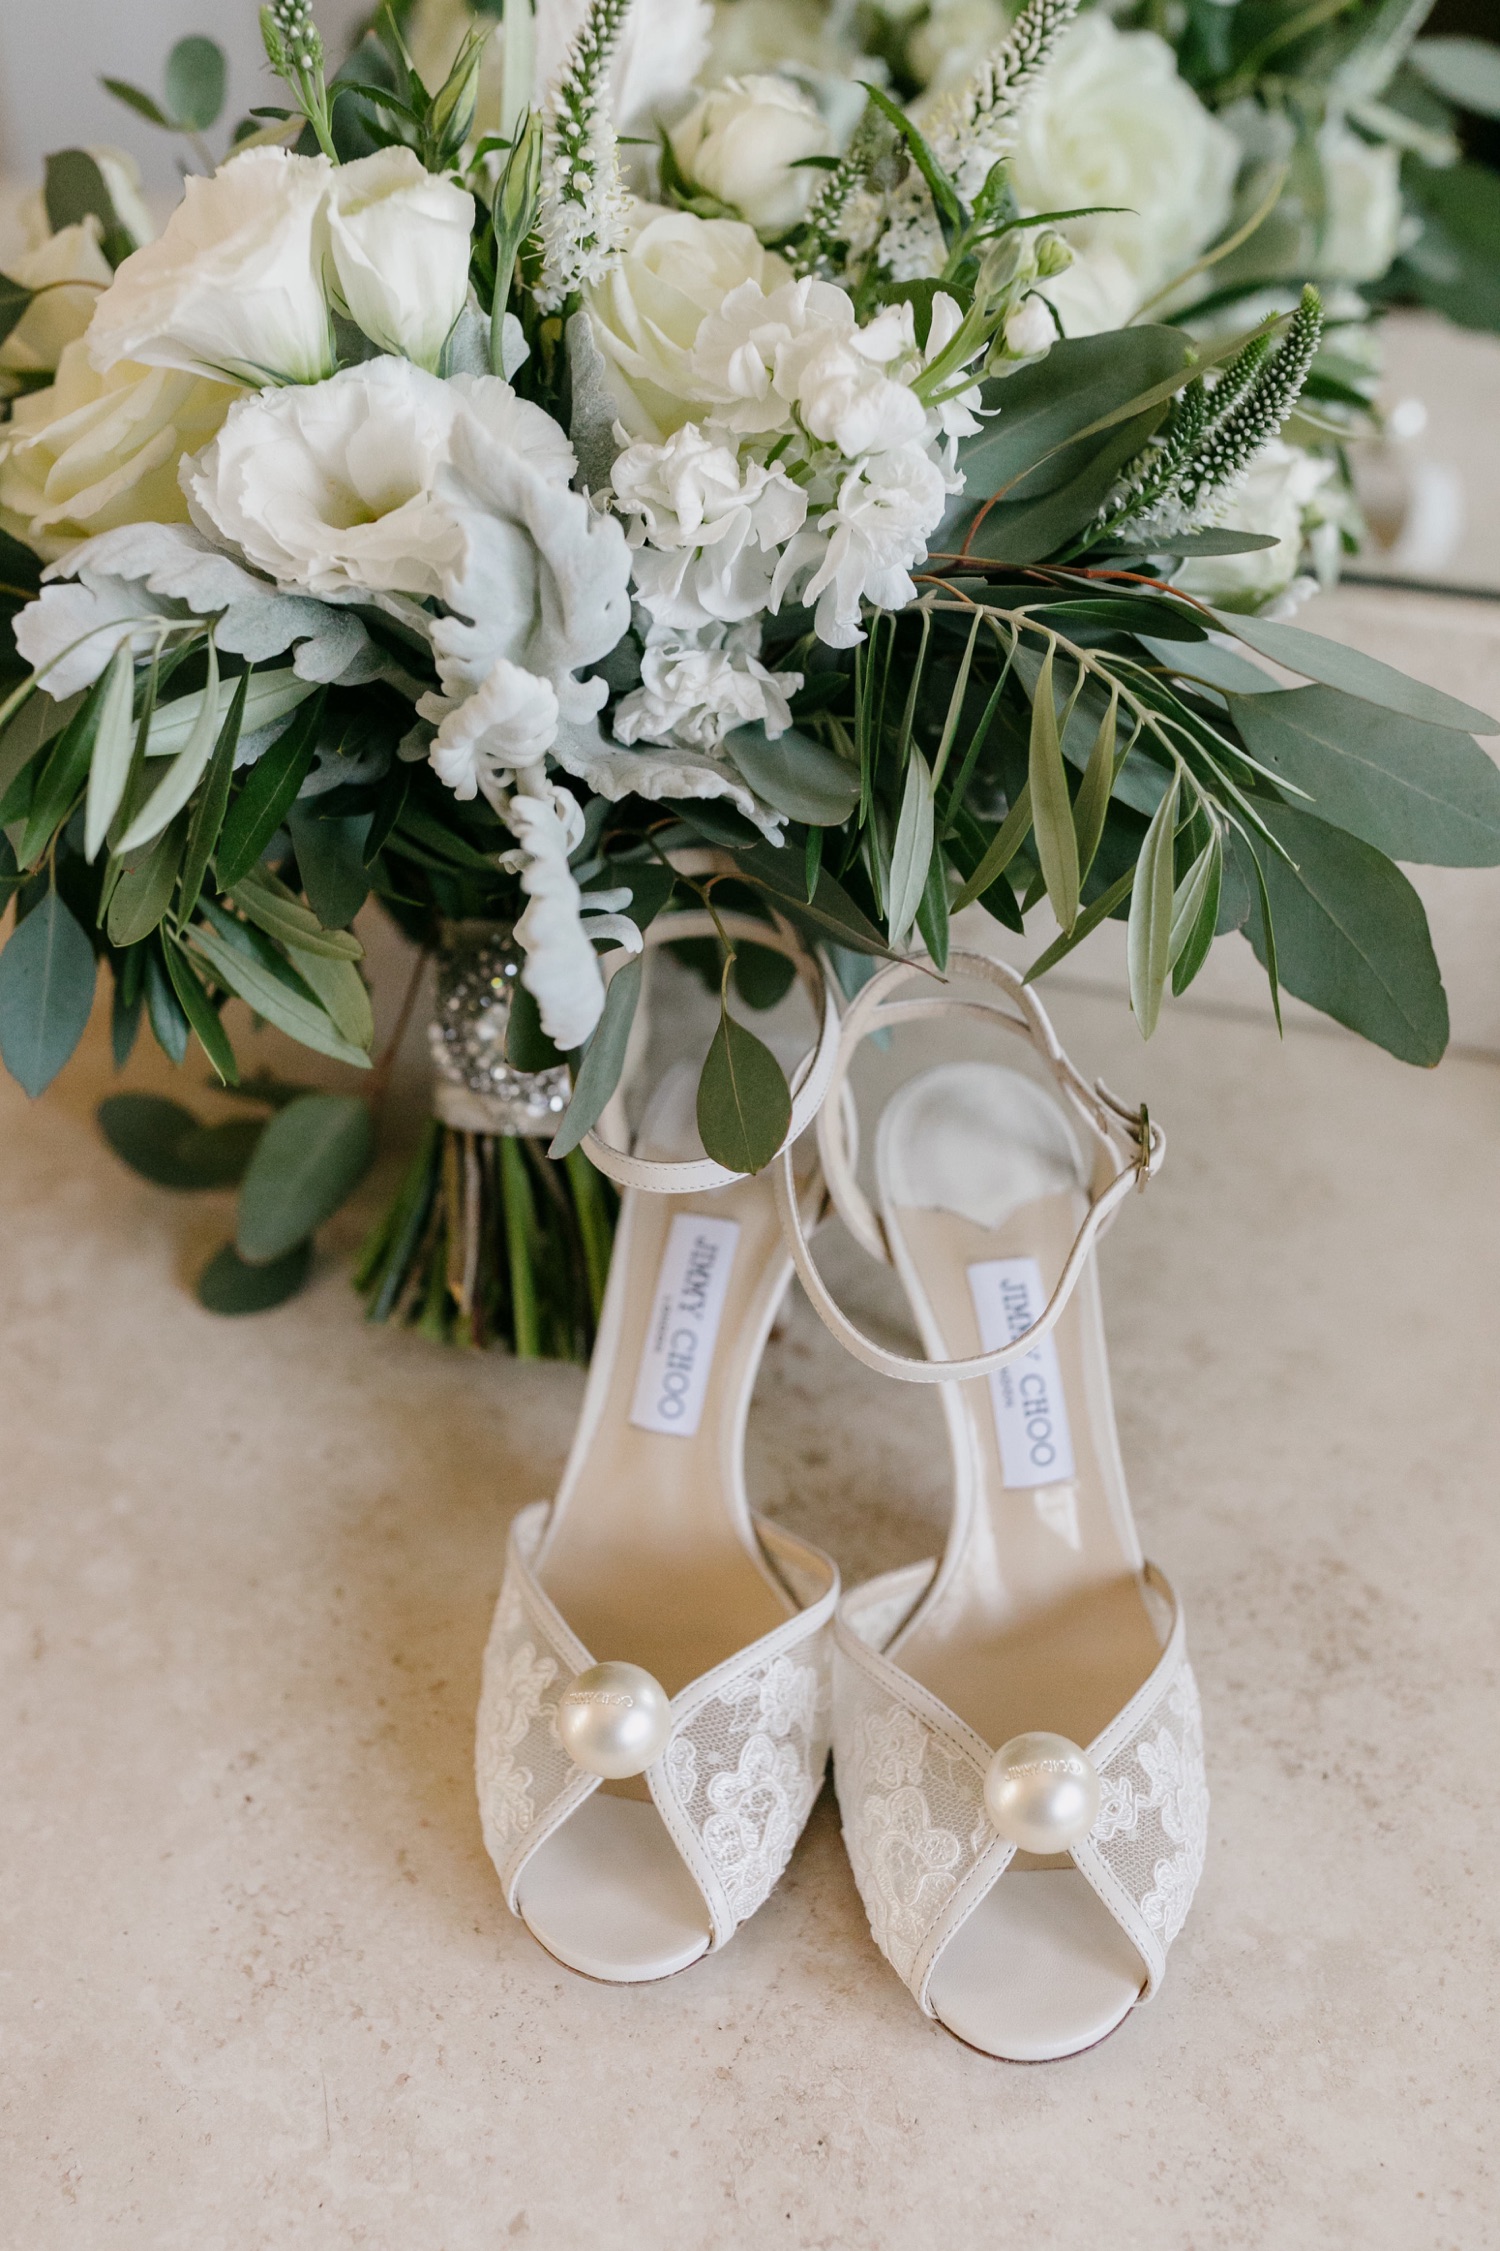 detail photo of wedding Jimmy choo heels and bouquet